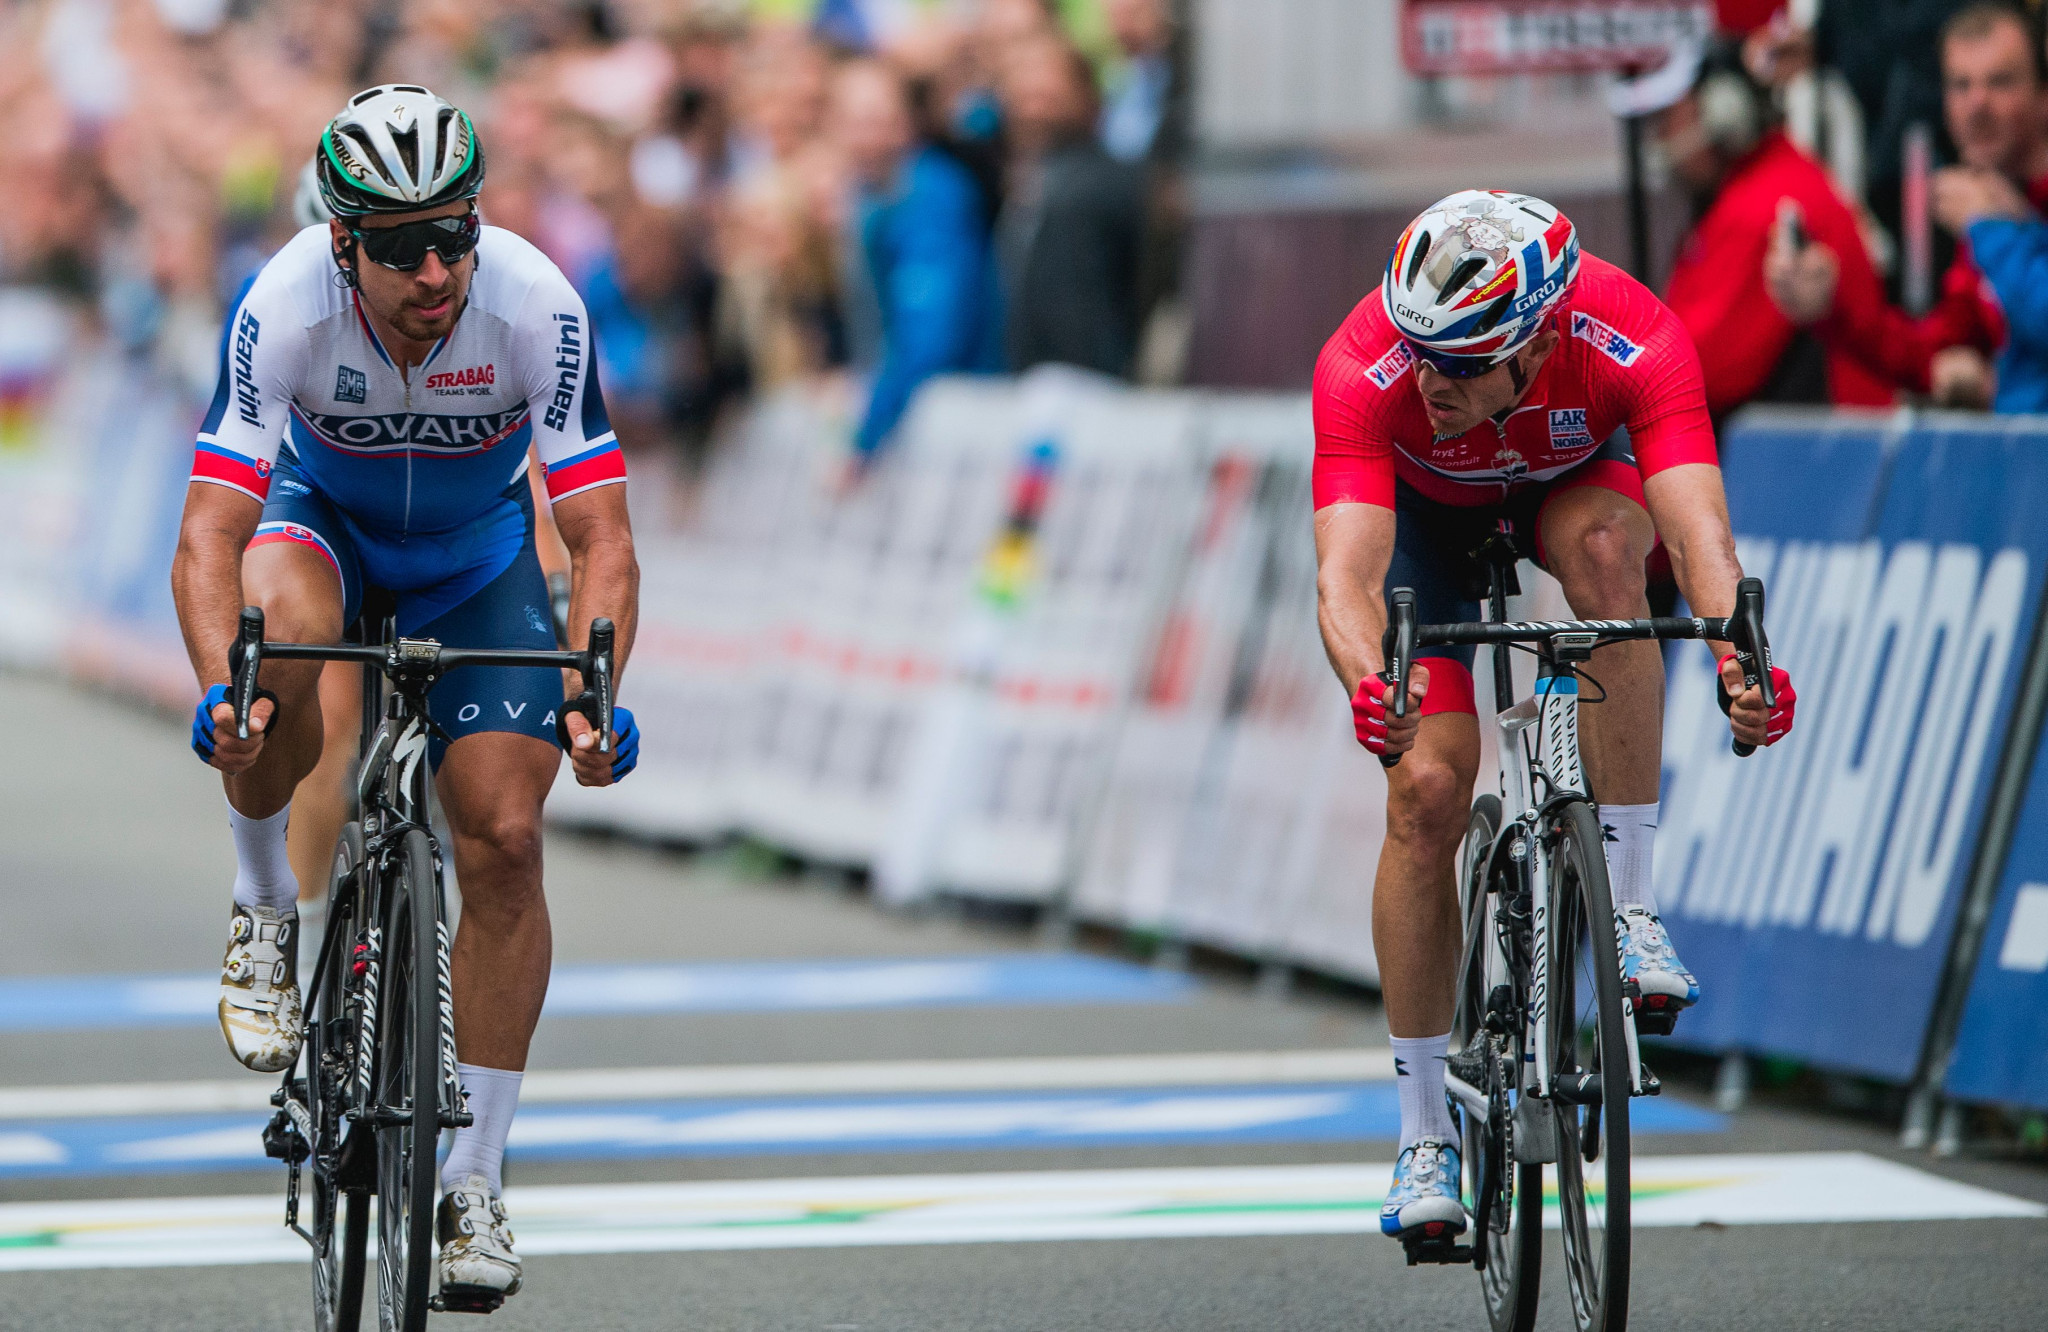   Peter Sagan, Slovakia, ft, won the elite men's road race at the 2017 World Road Championships in Bergen, Norway for the third time in a row © Getty Images 